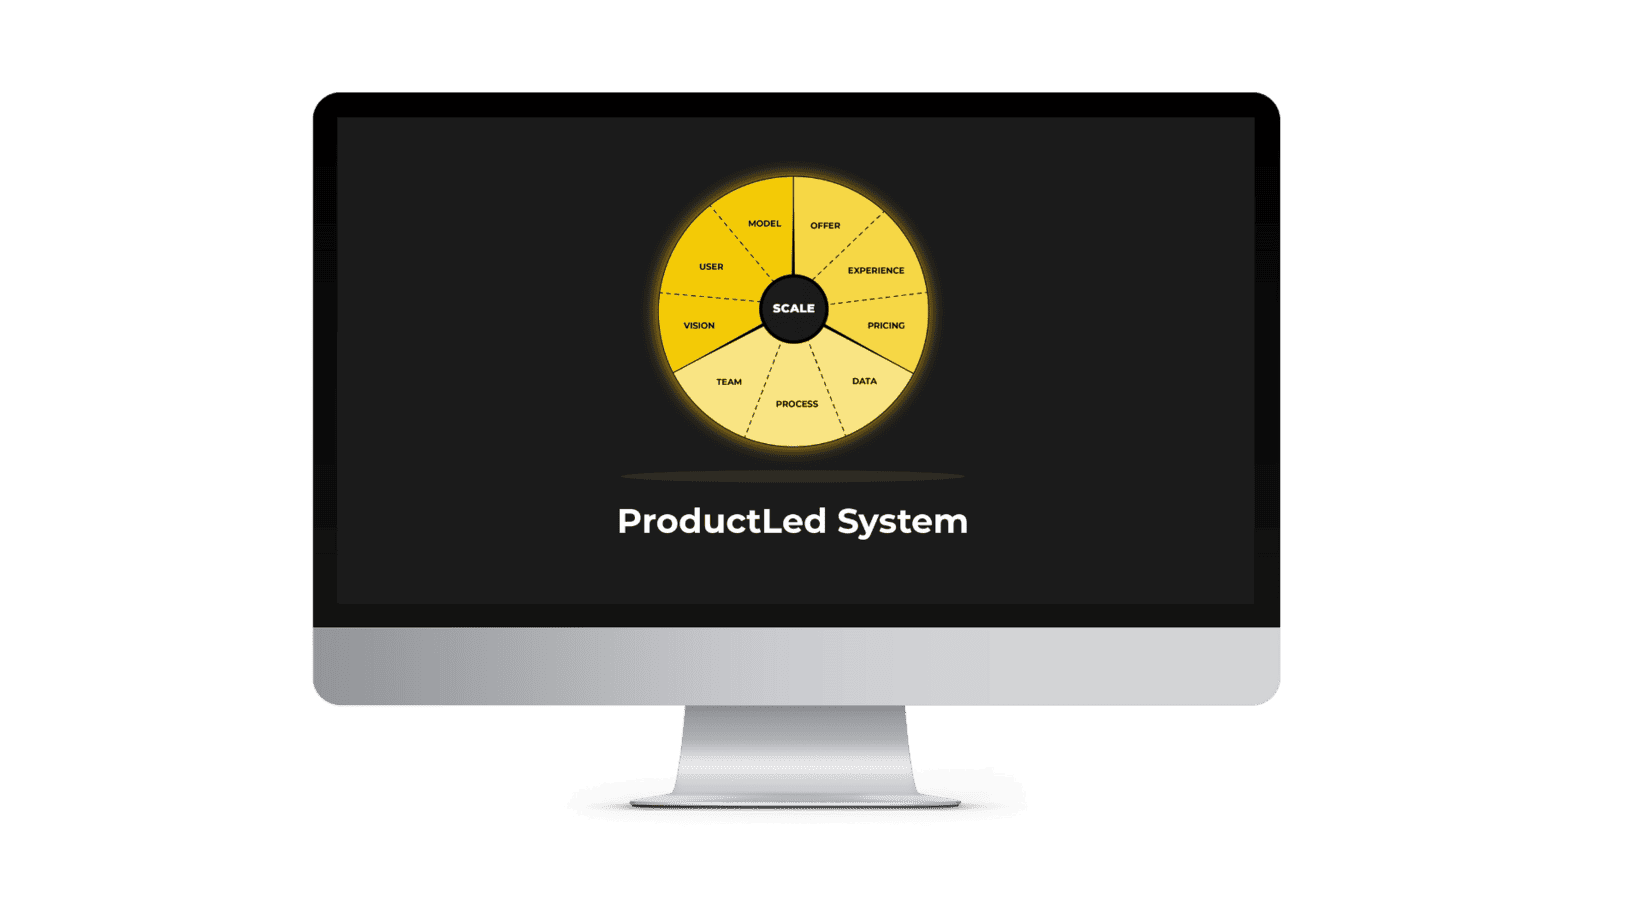 ProductLed System